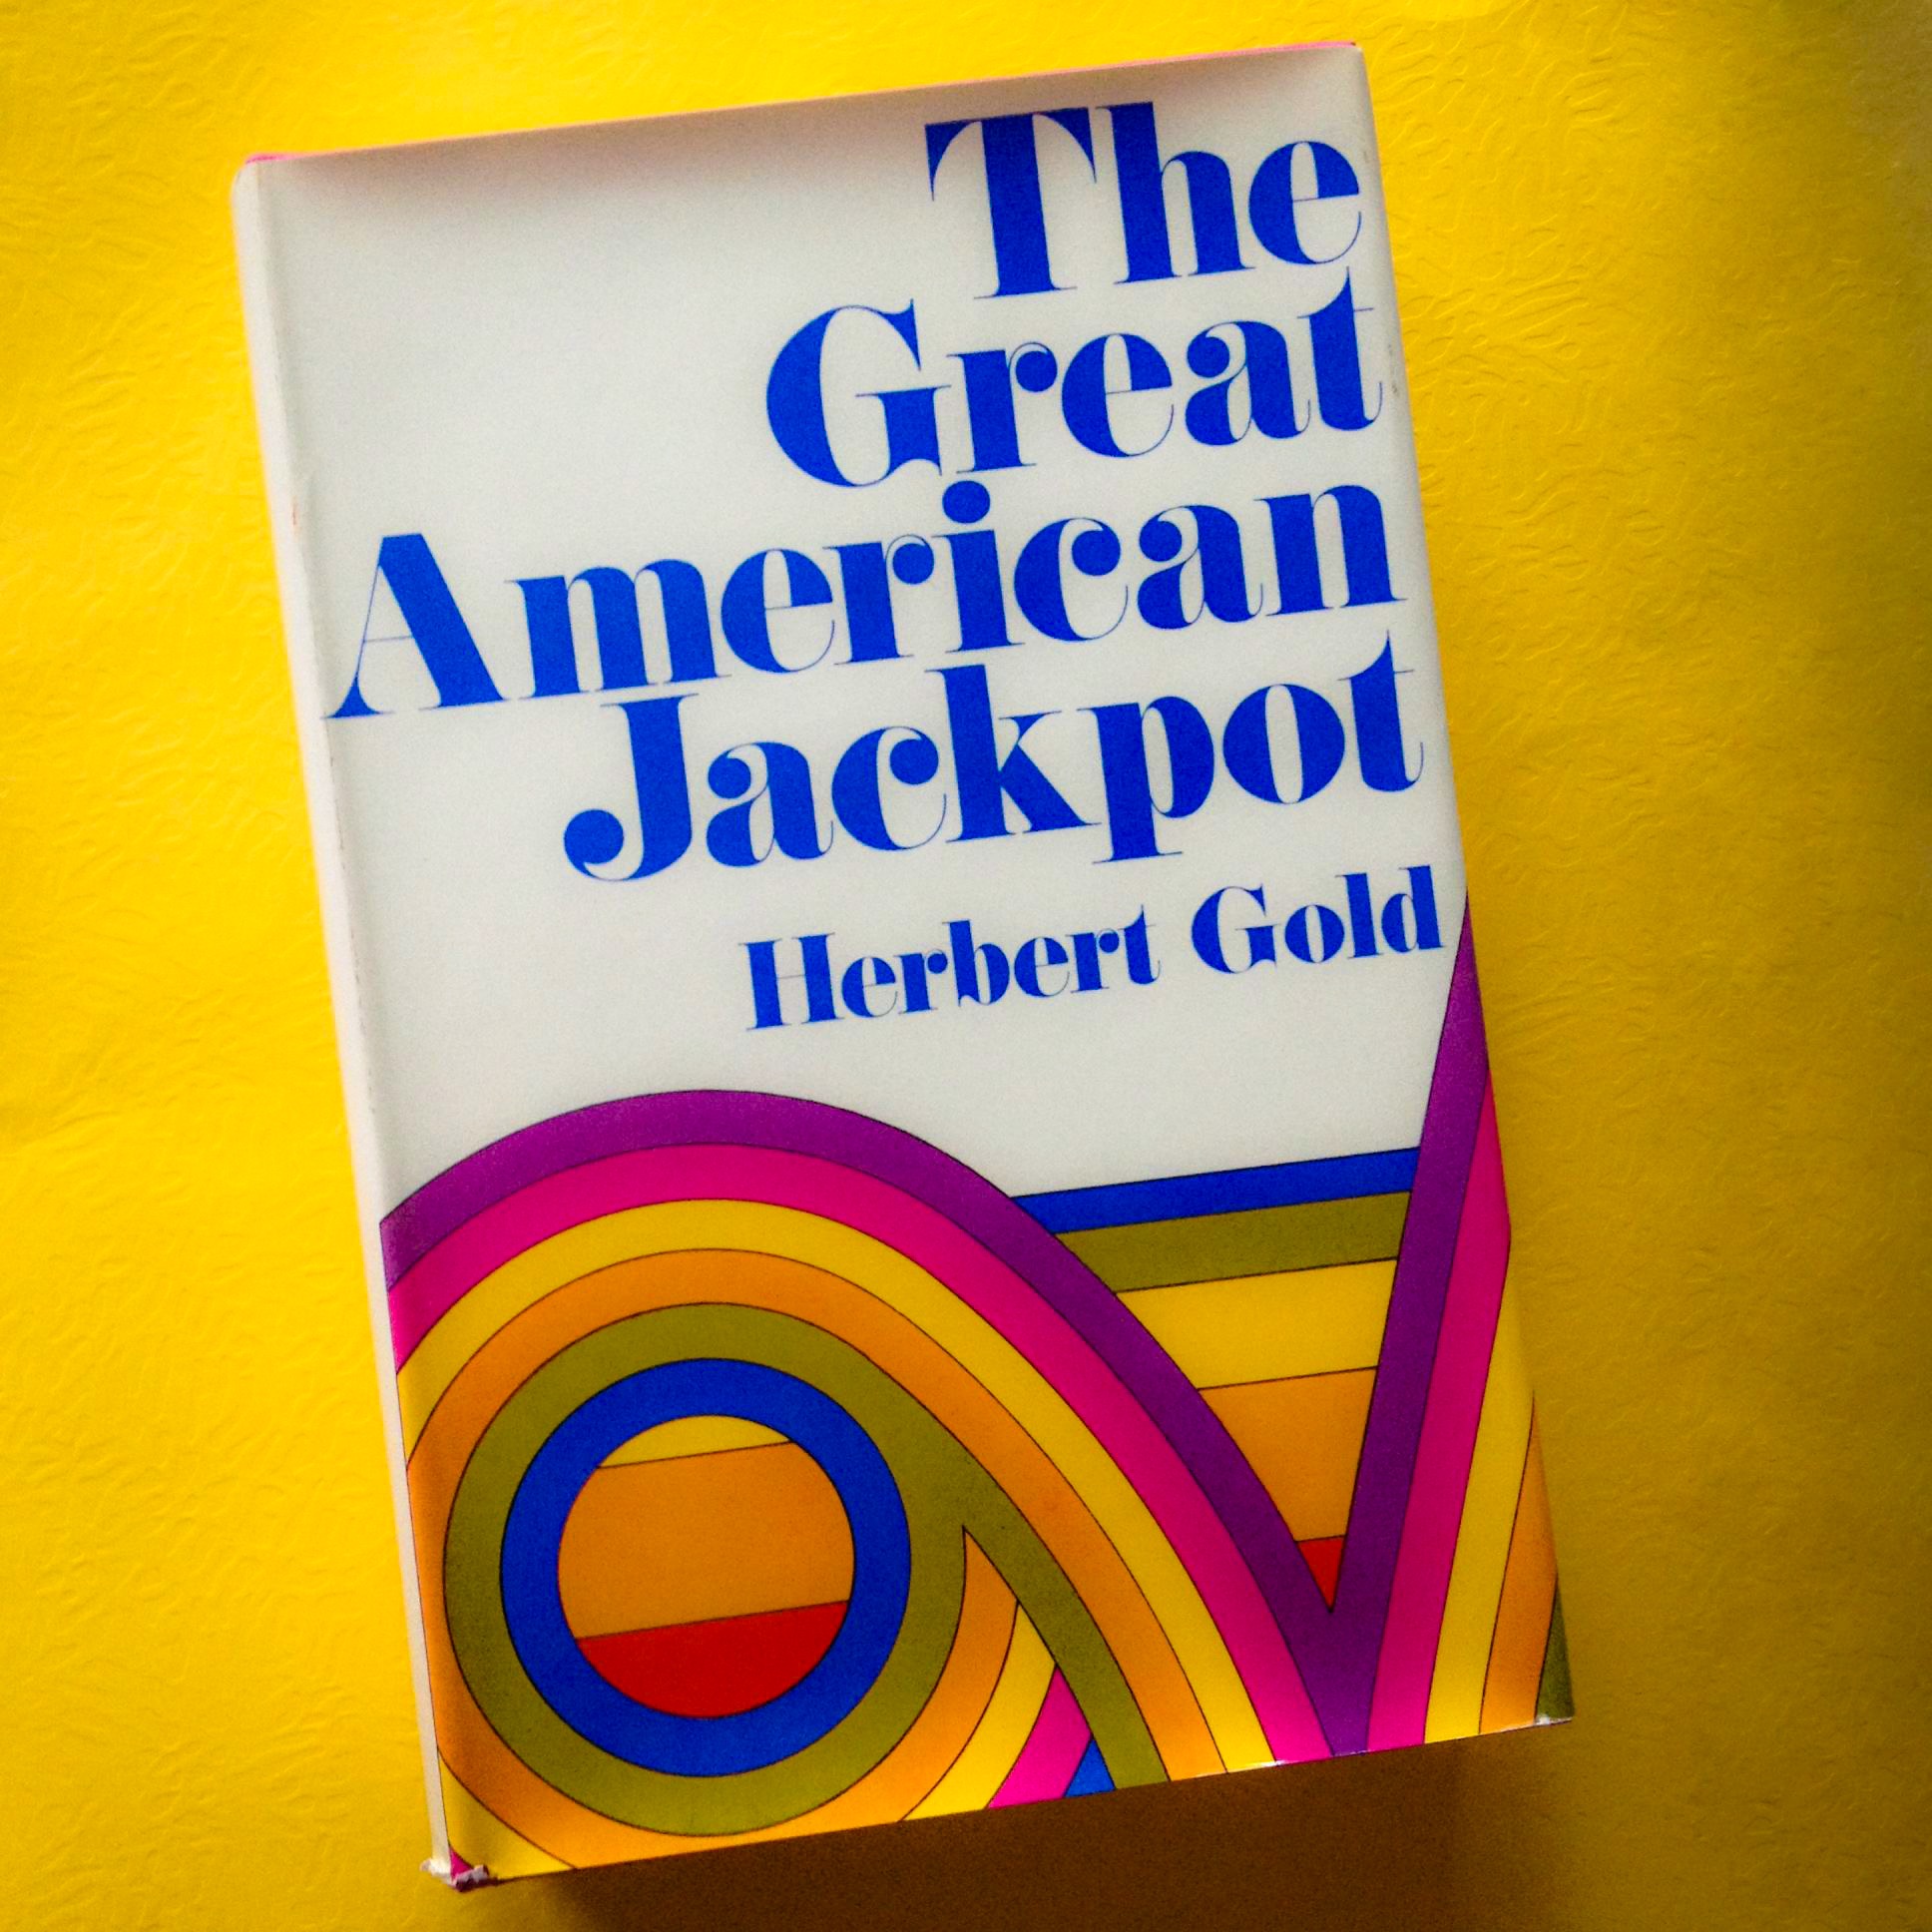 Herbert Gold - 1969 - THE GREAT AMERICAN JACKPOT - UK Edition - Photo by Diana Phillips.JPG